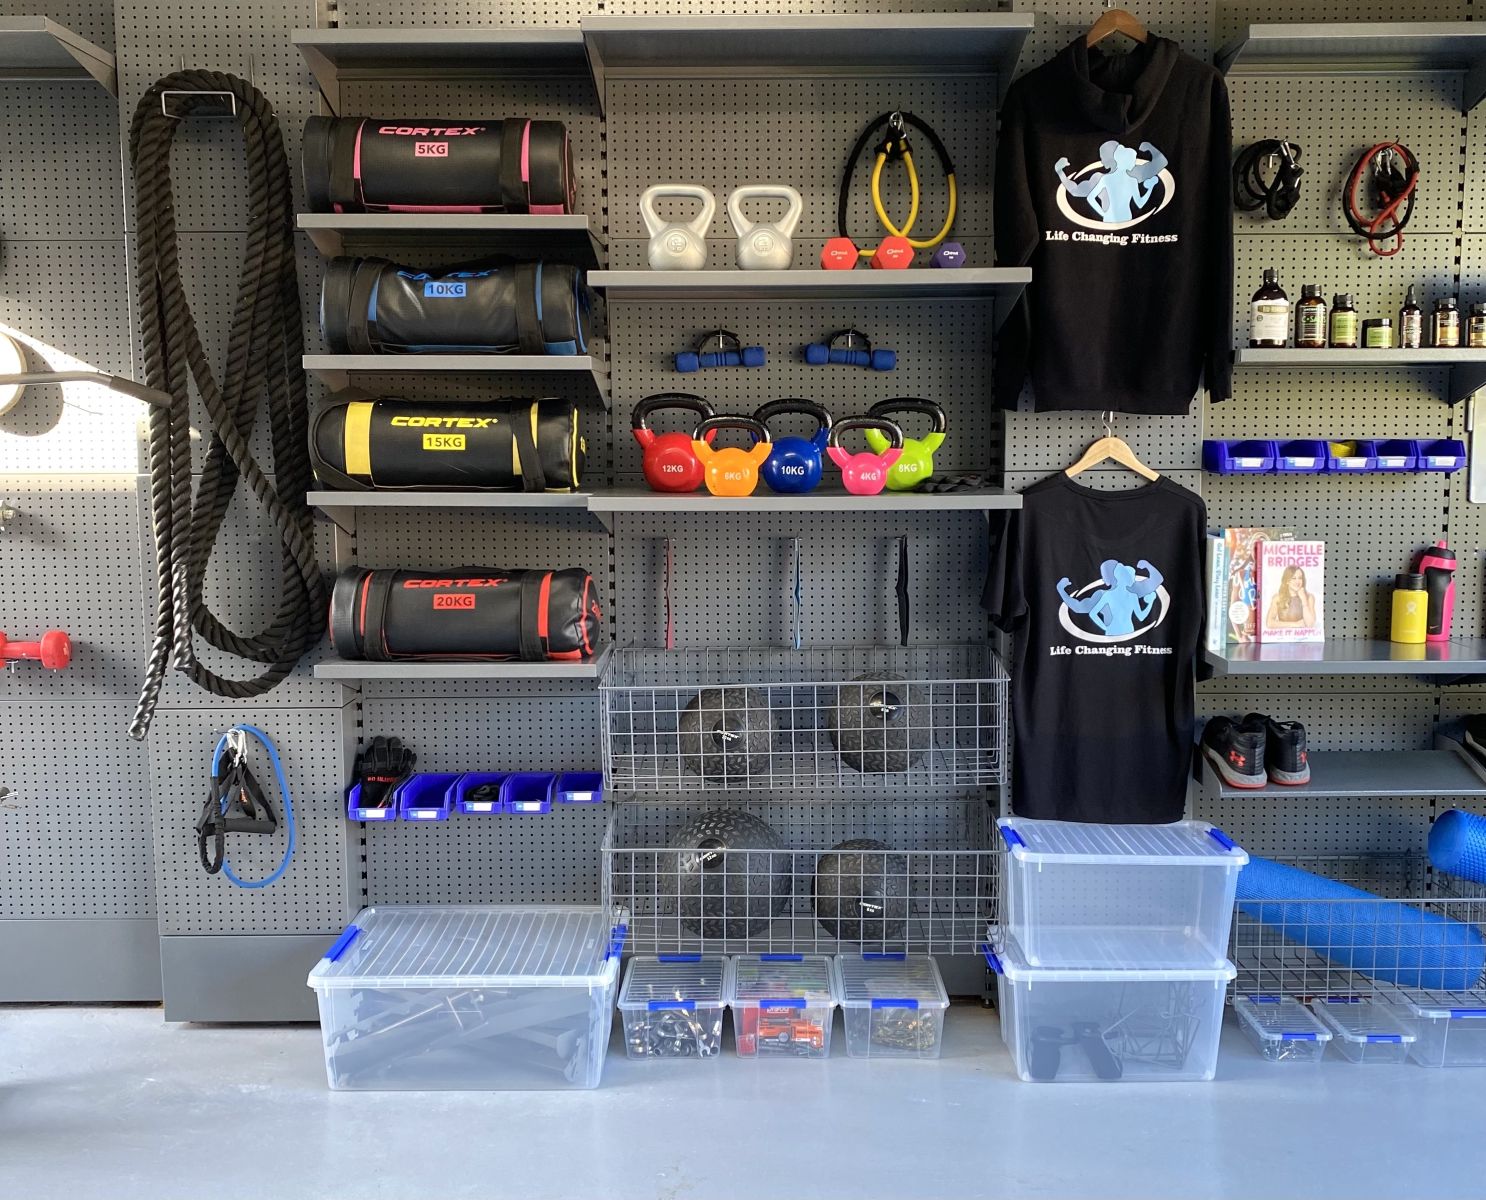 A garage storage system designed by GarageKing for a home gym set up with shelves, hooks, baskets and holders containing gym equipment